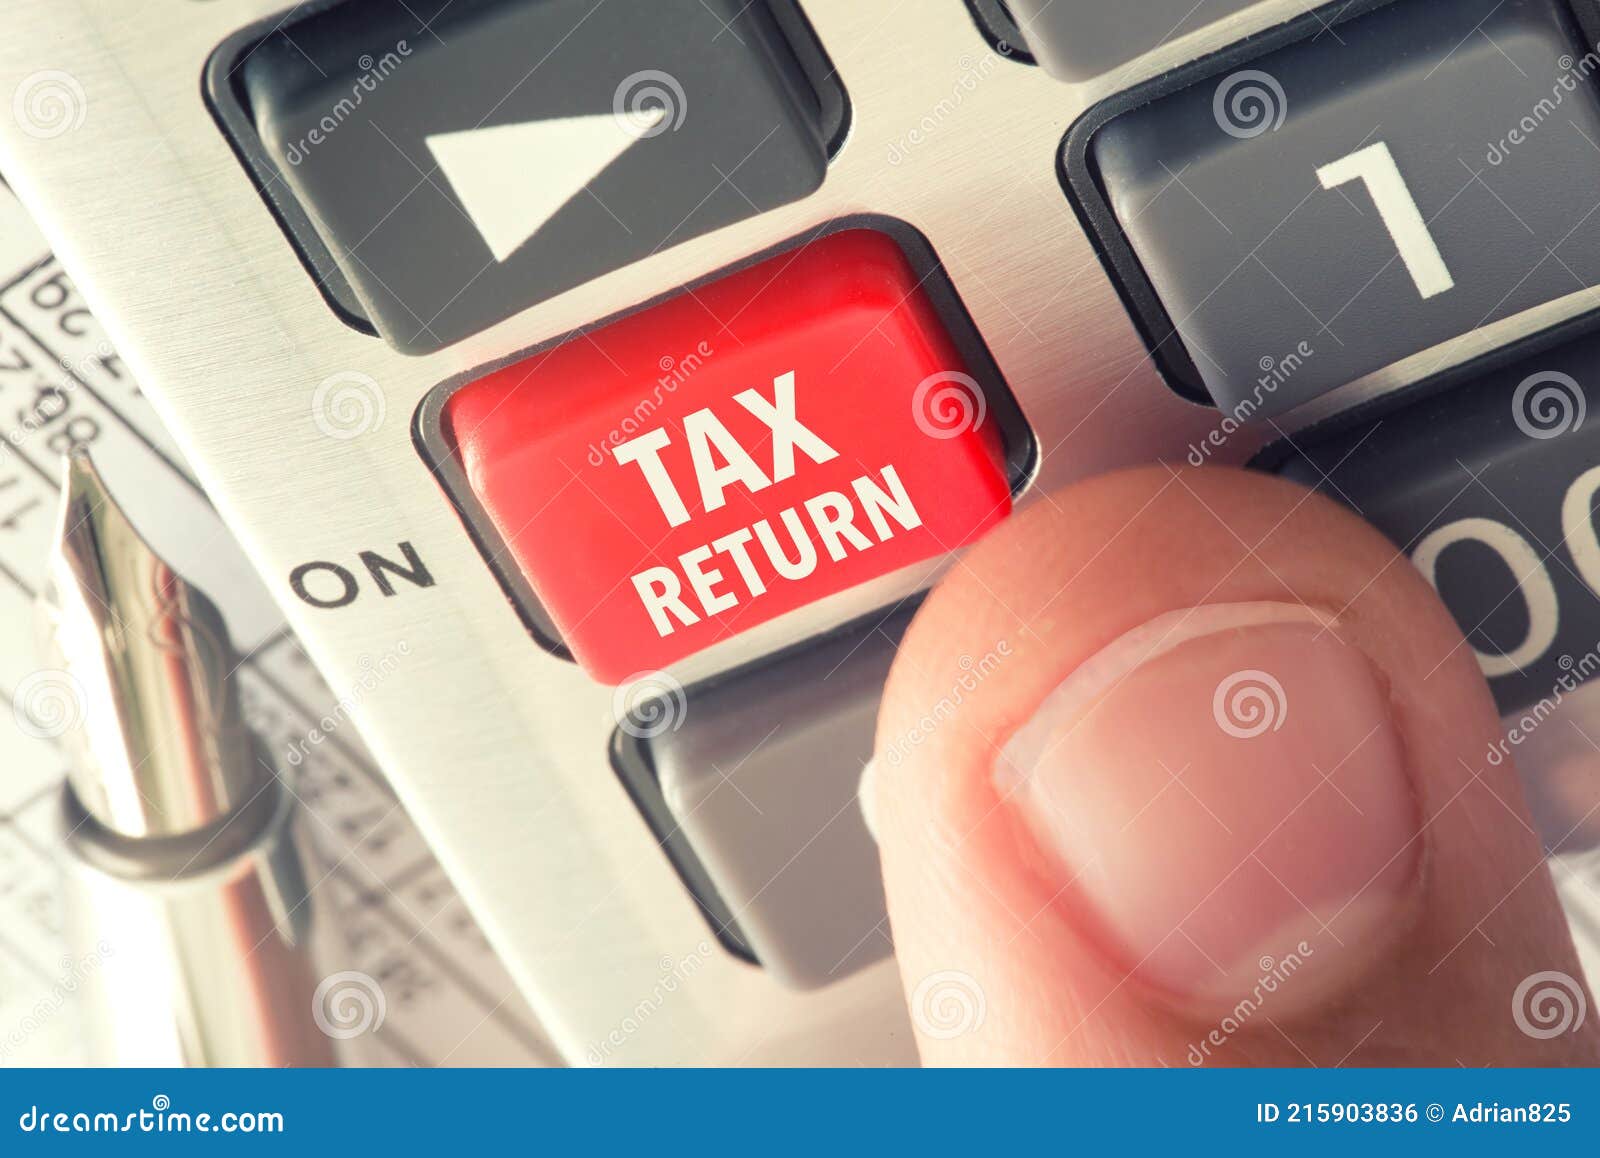 vat-or-tax-return-concept-with-hand-calculator-buttons-and-finger